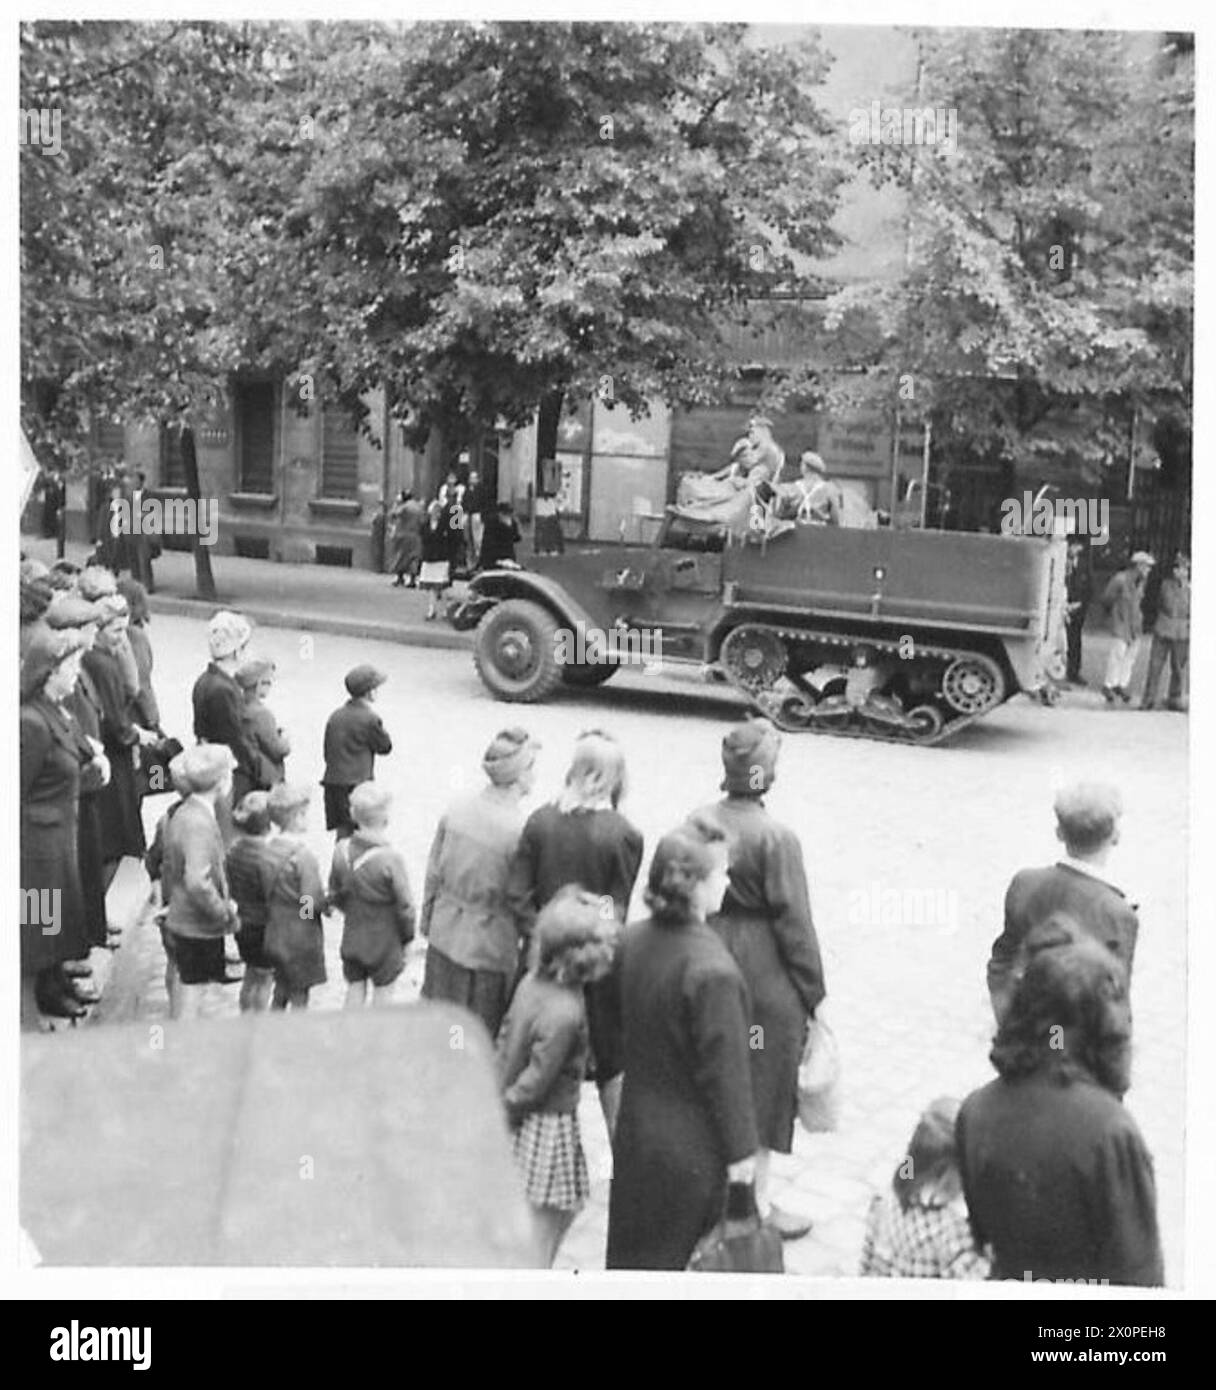 BRITISH ENTRY INTO BERLIN - Berliners watch a half-track vehicle enter Berlin. Photographic negative , British Army, 21st Army Group Stock Photo